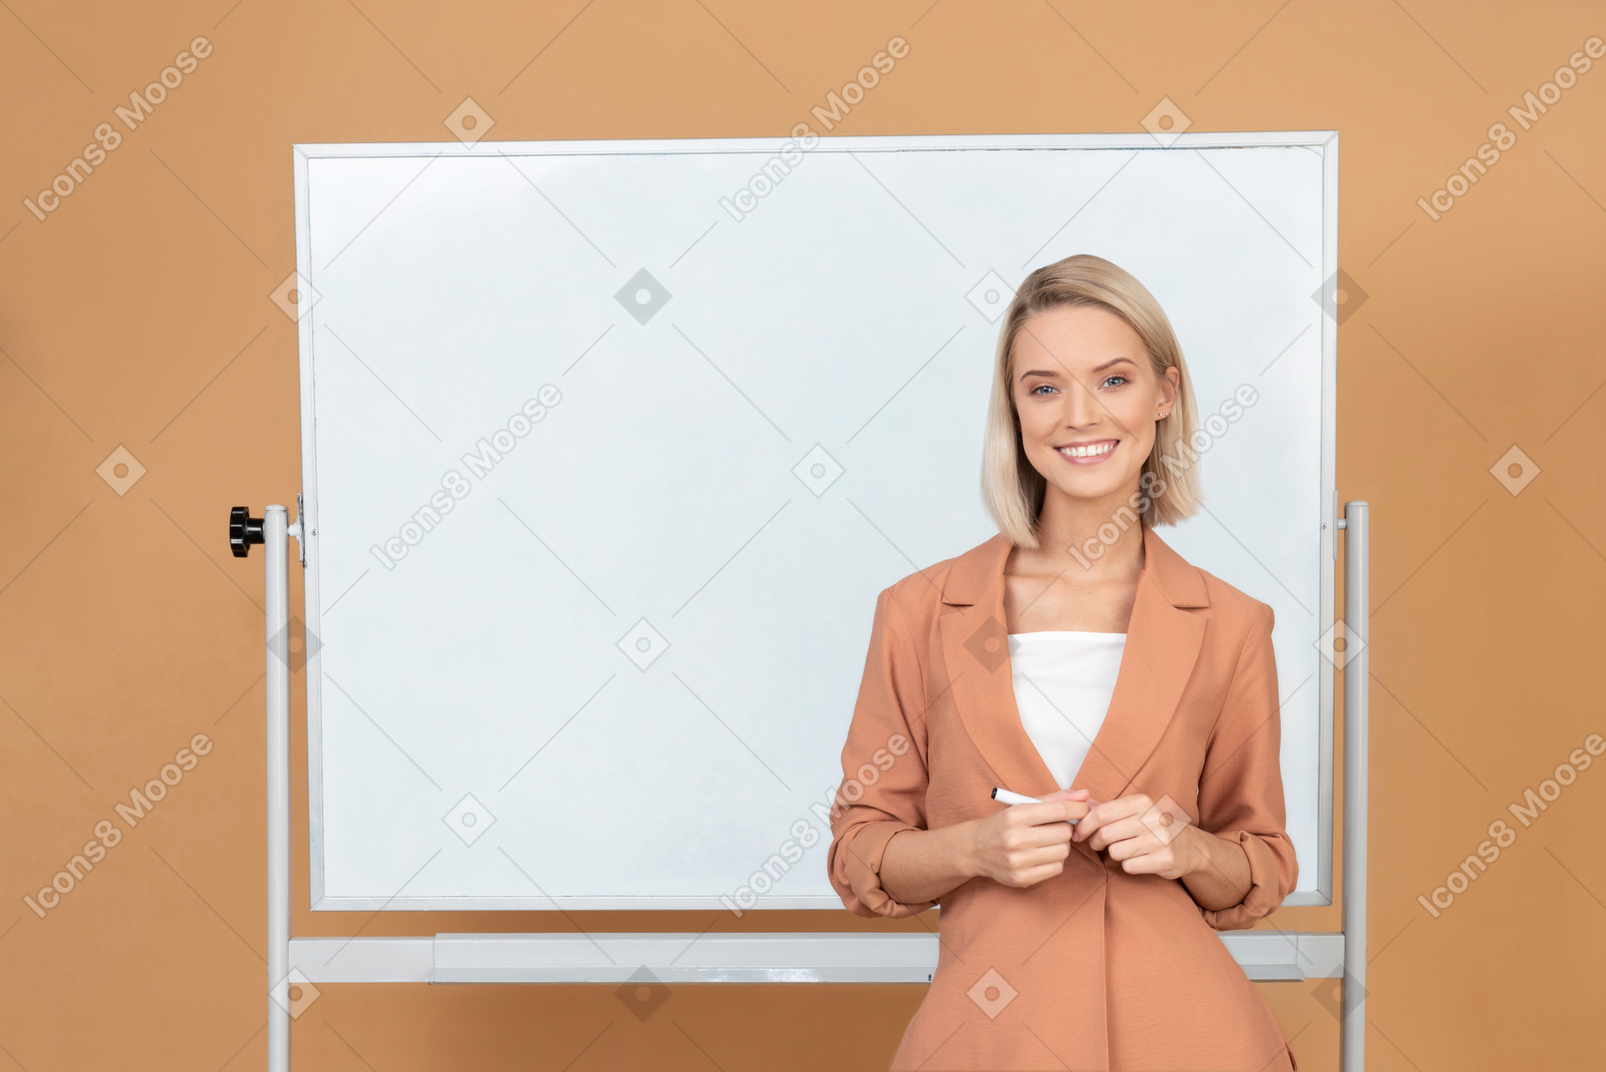 Attractive young woman explaining something near the whiteboard